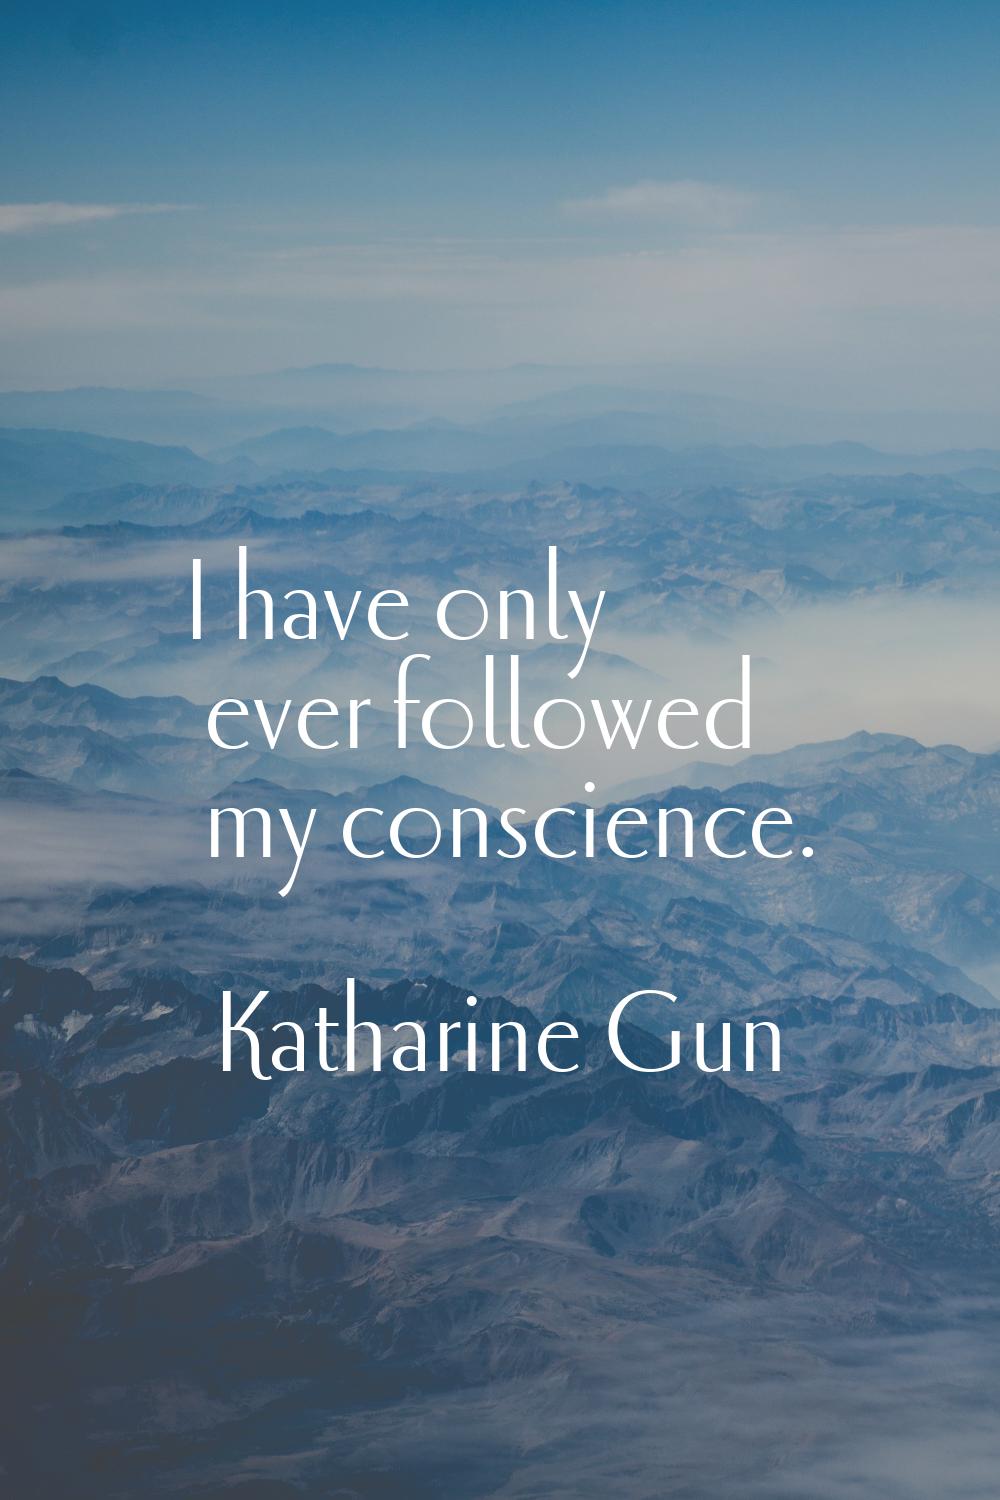 I have only ever followed my conscience.